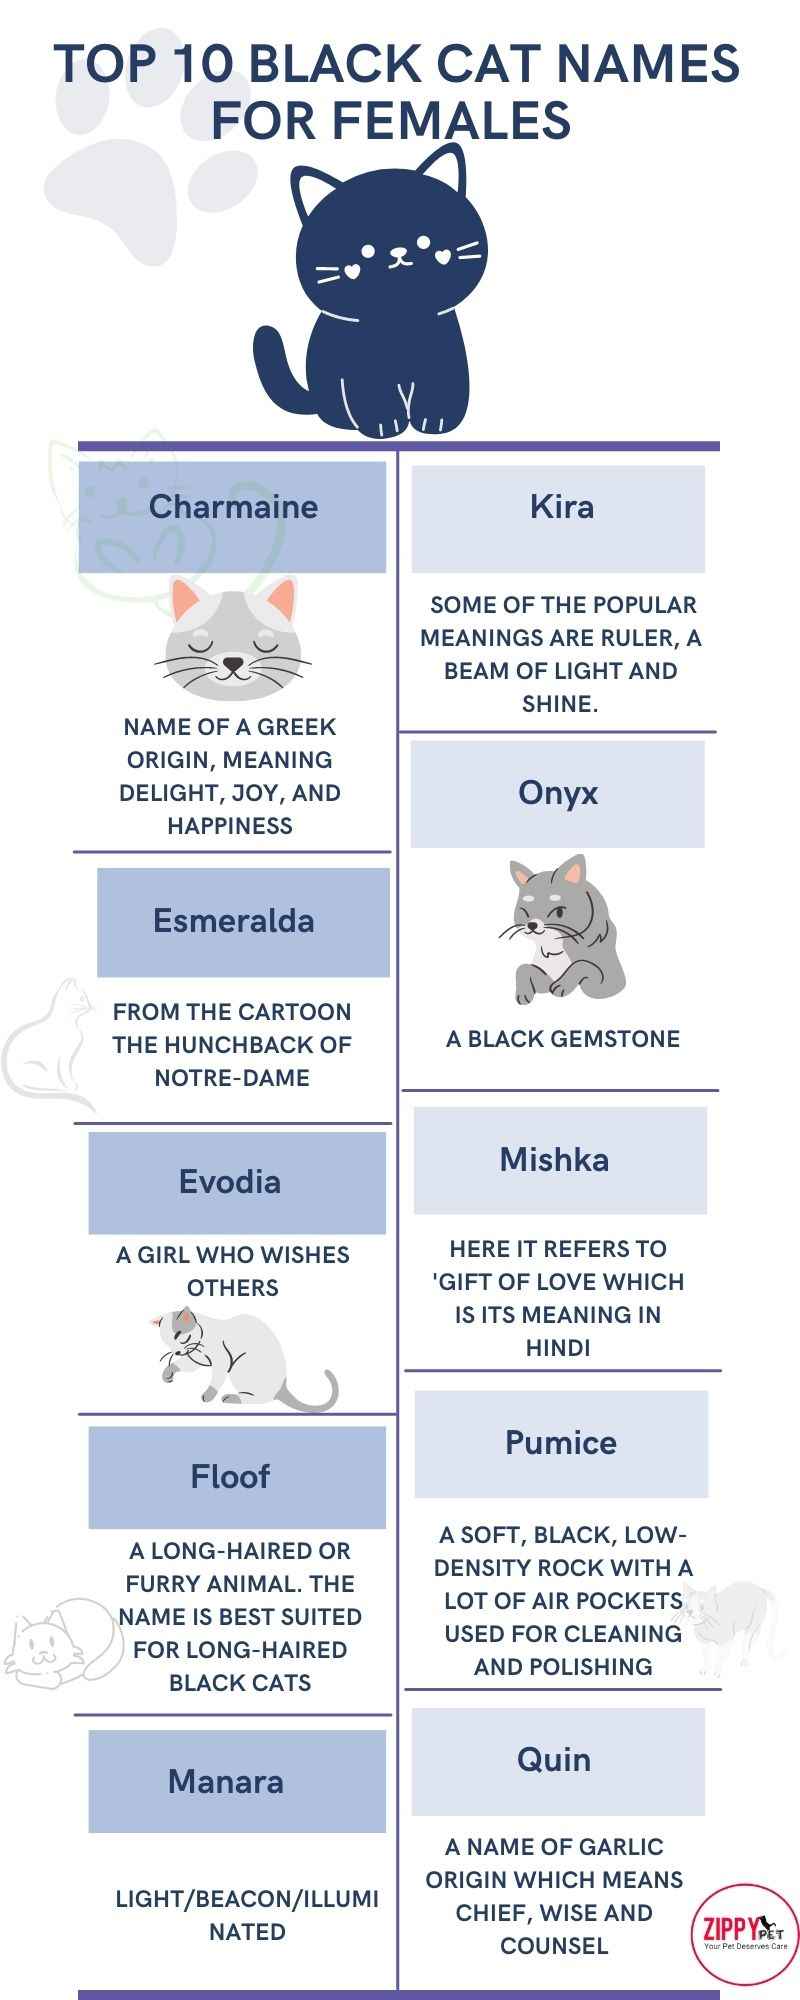 Top 10 Black Cat Names for Female Black Cats